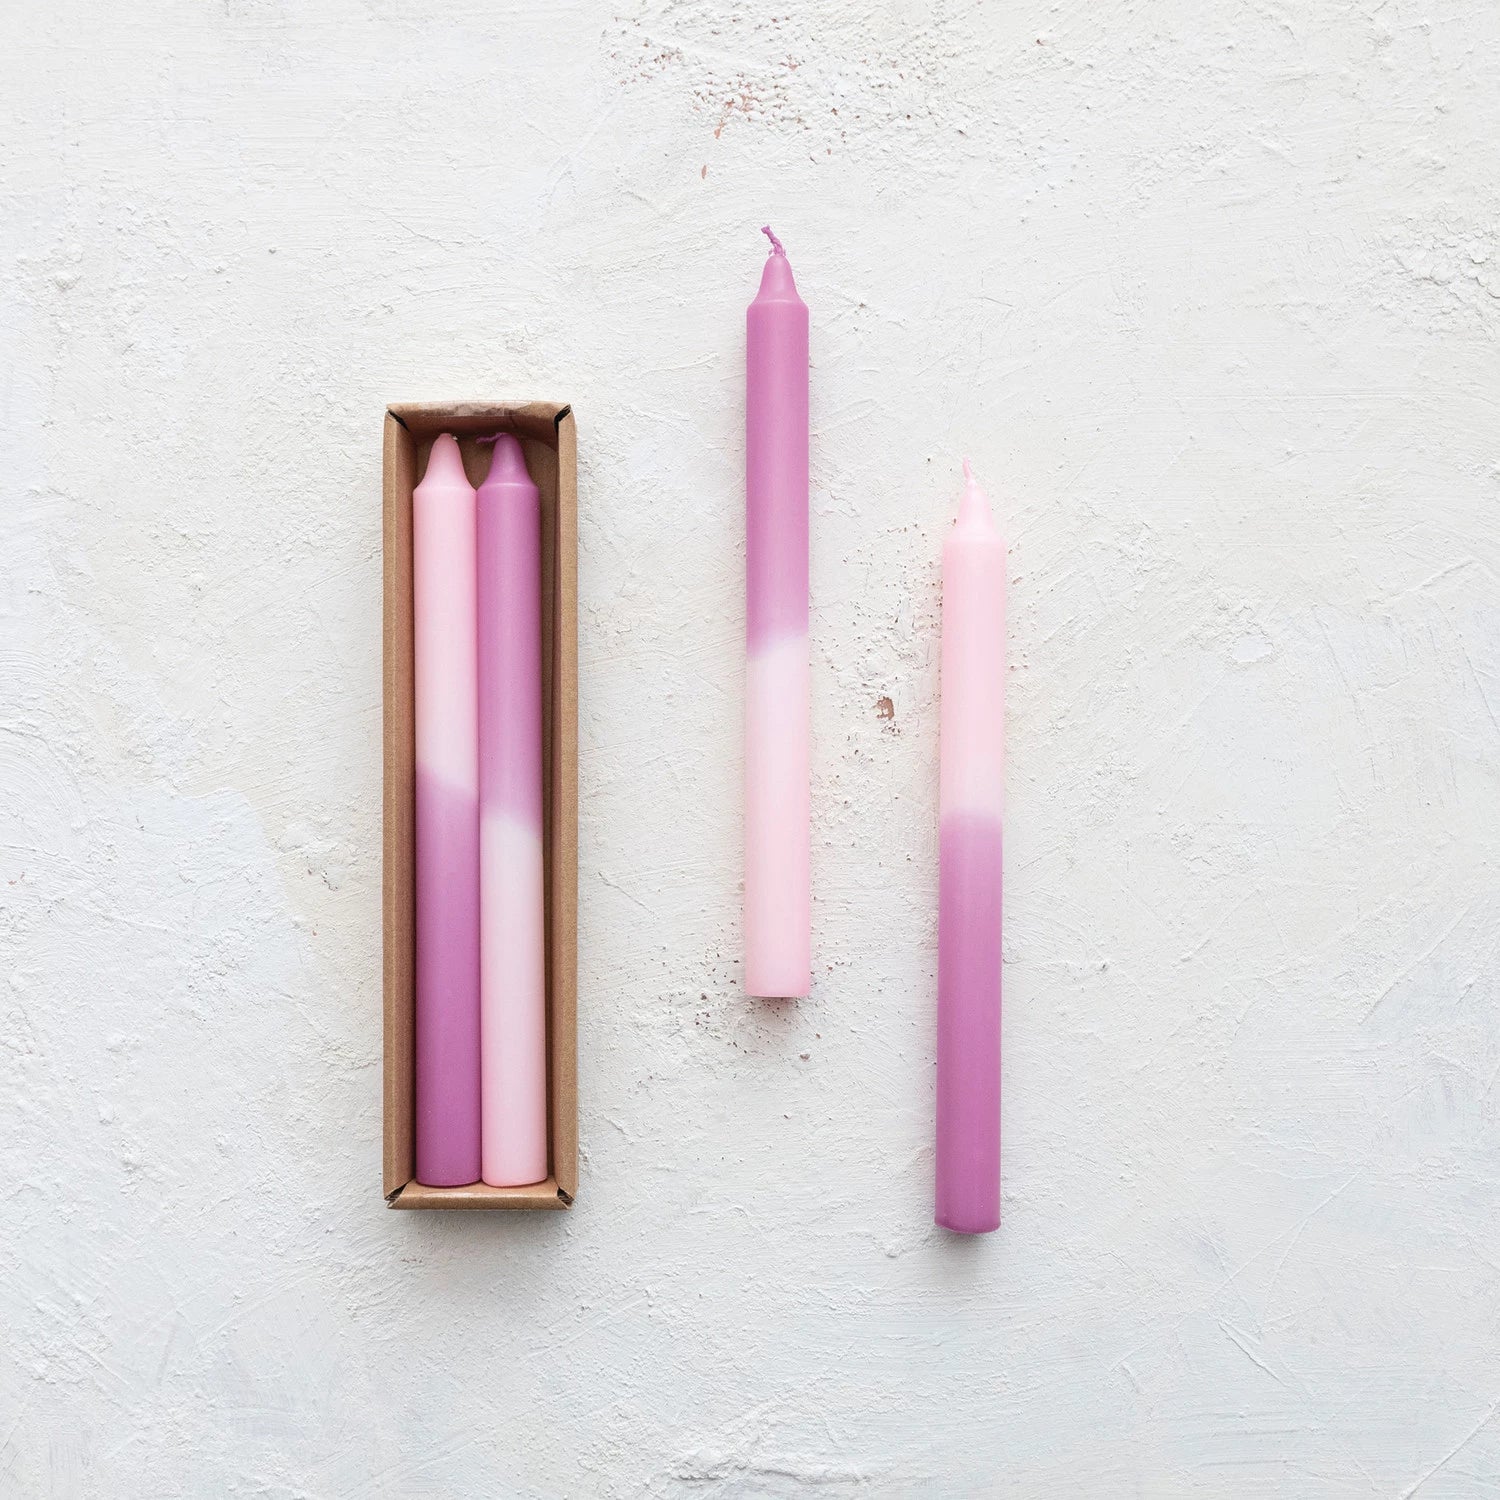 set of 2 pink and lilac taper candles set next to a boxed set of candles on a plaster background.